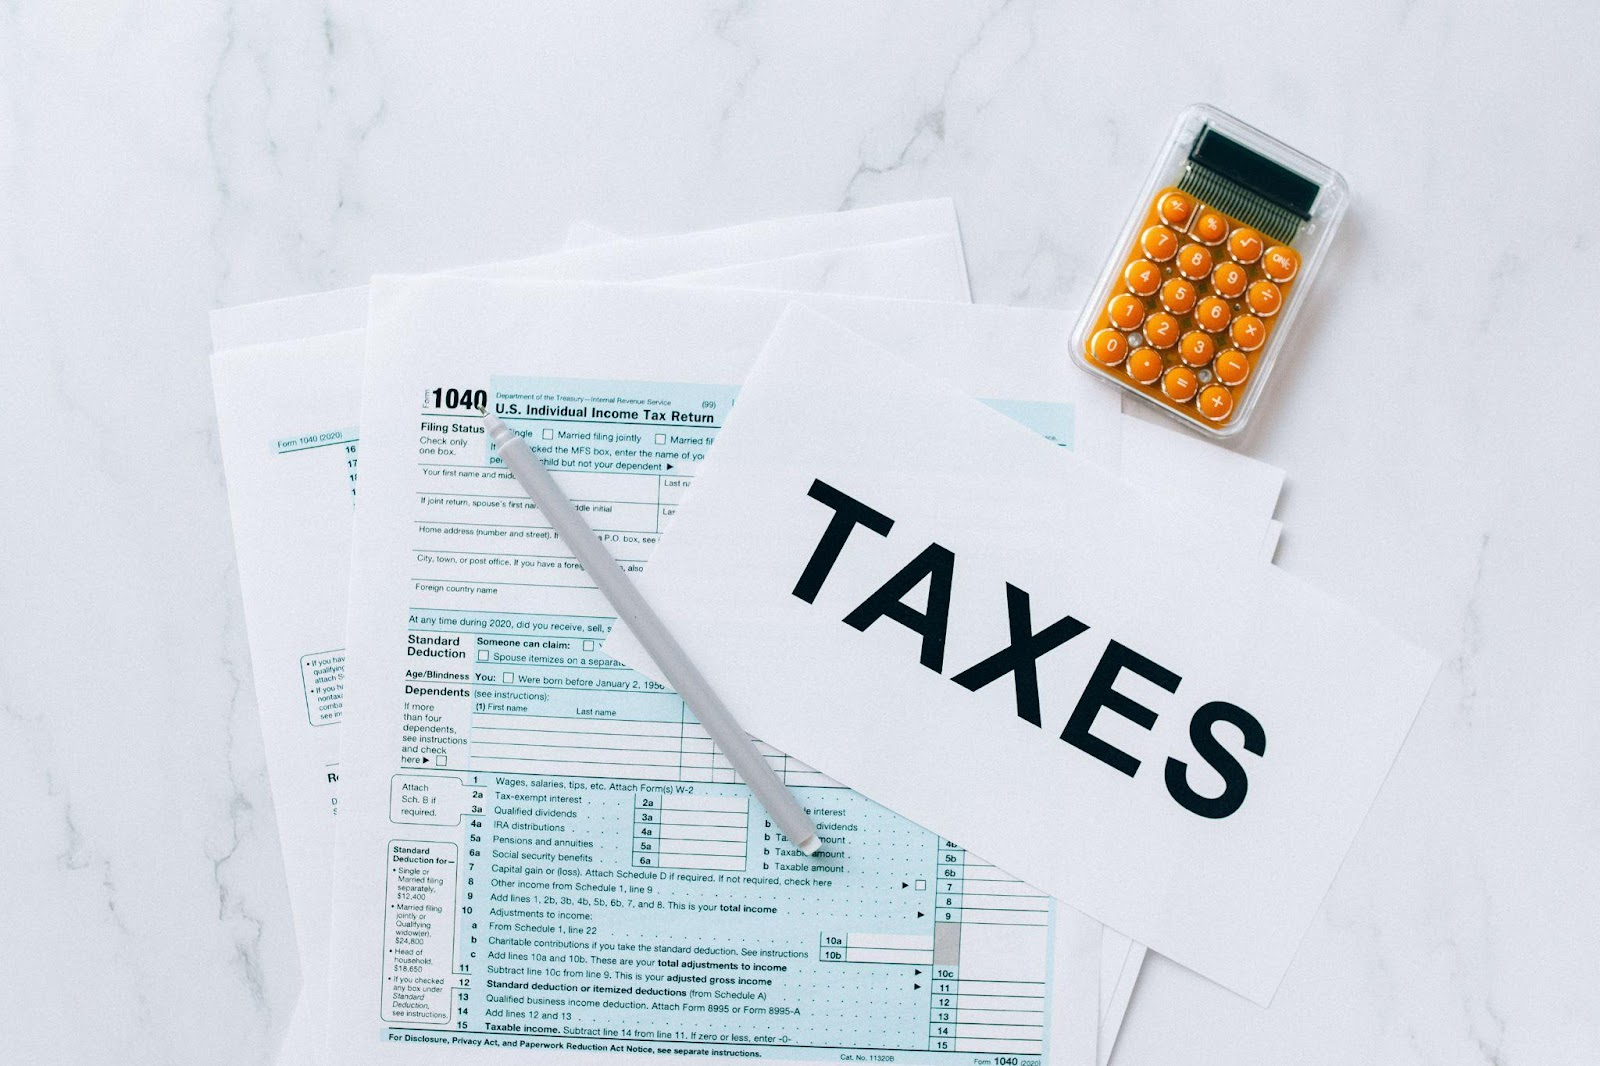 Essential Tips For First-Time Tax Filers